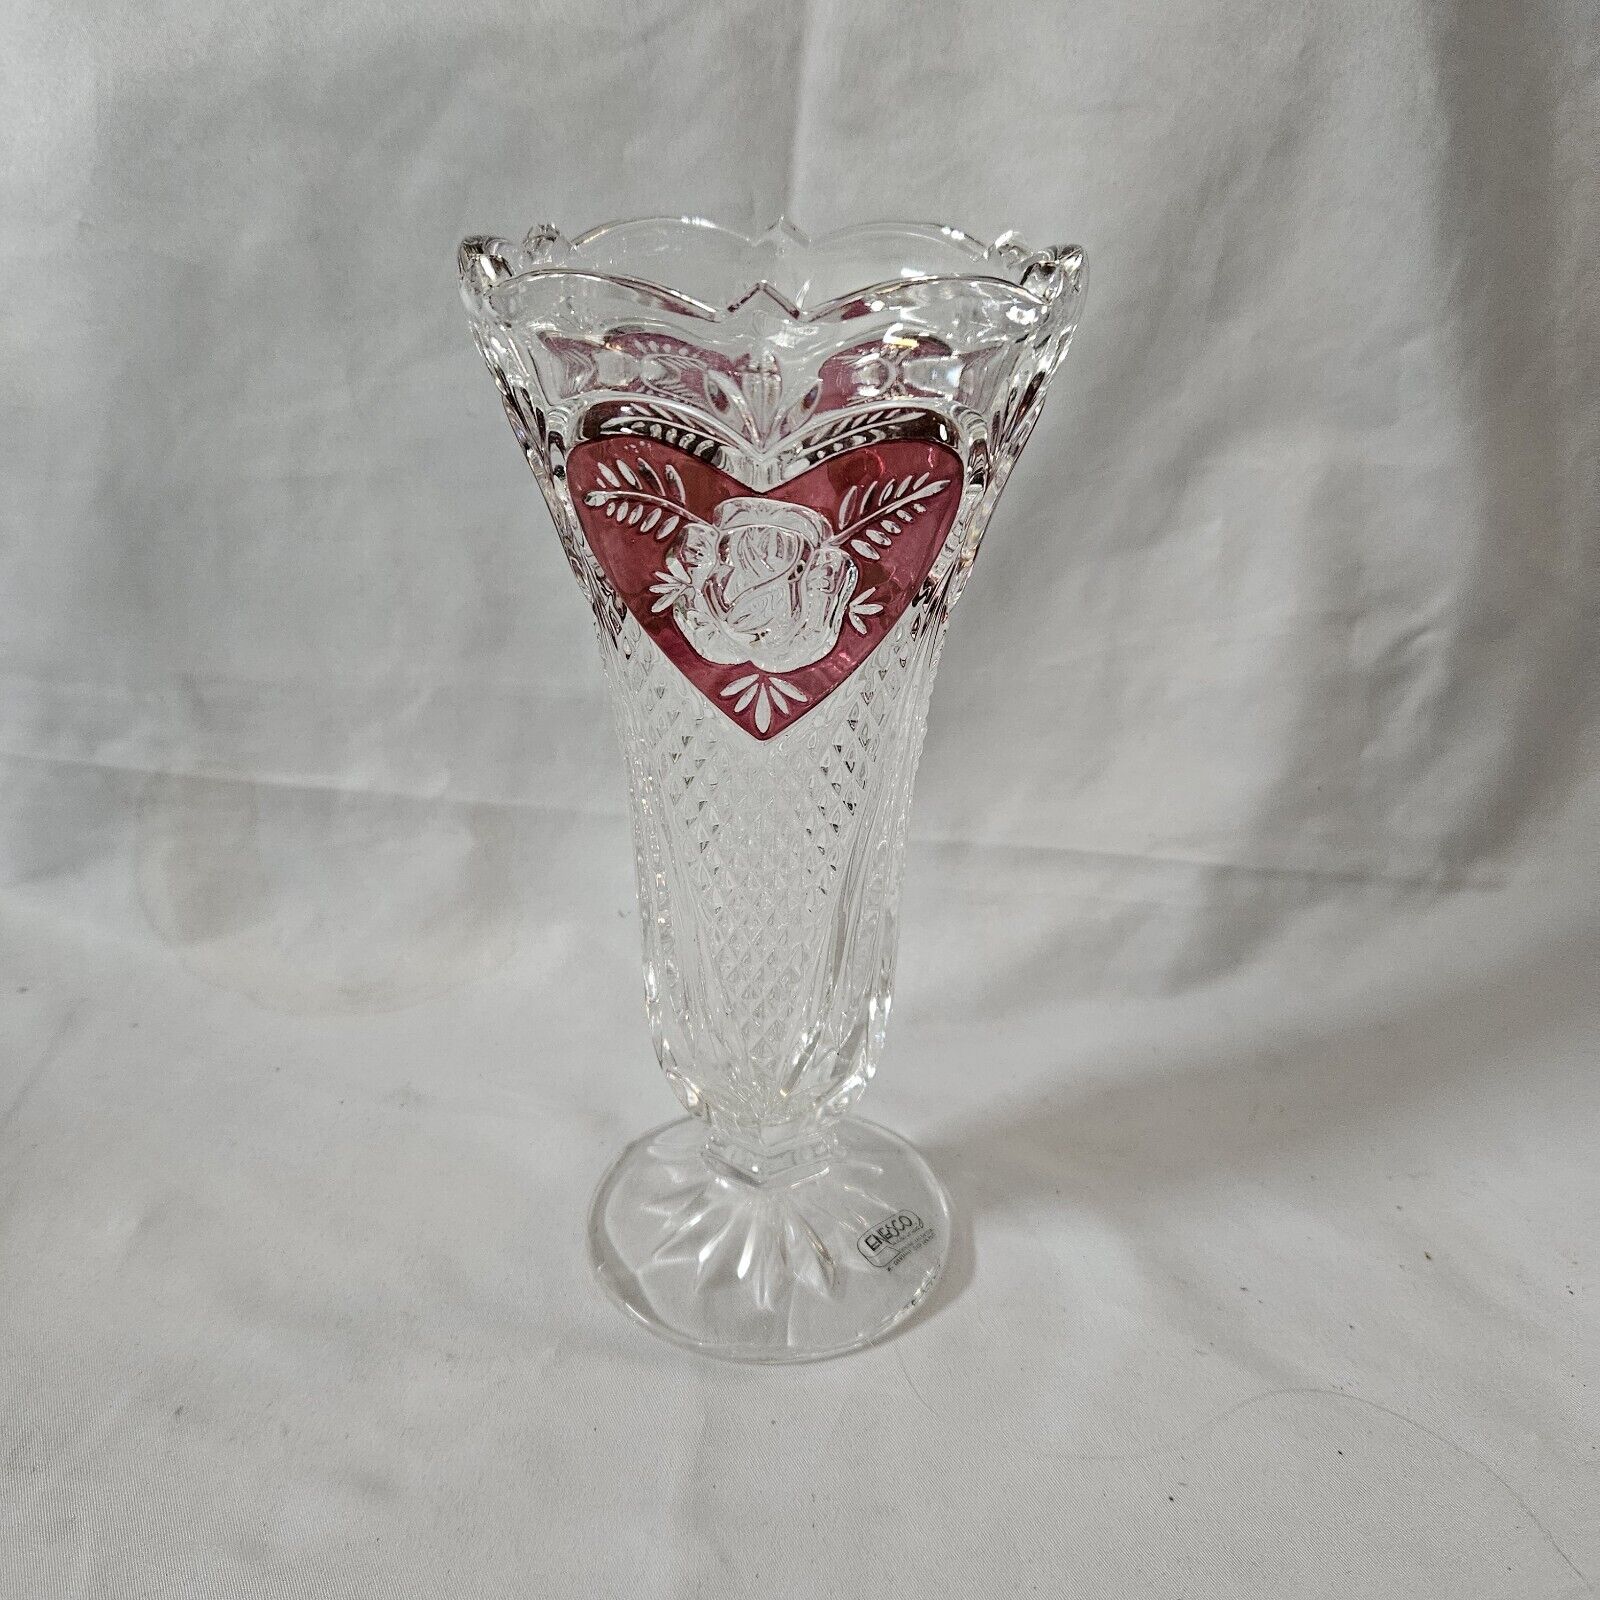 Enesco Lead Crystal  Vase Ruby  Flashed  Hearts  Roses 7.5